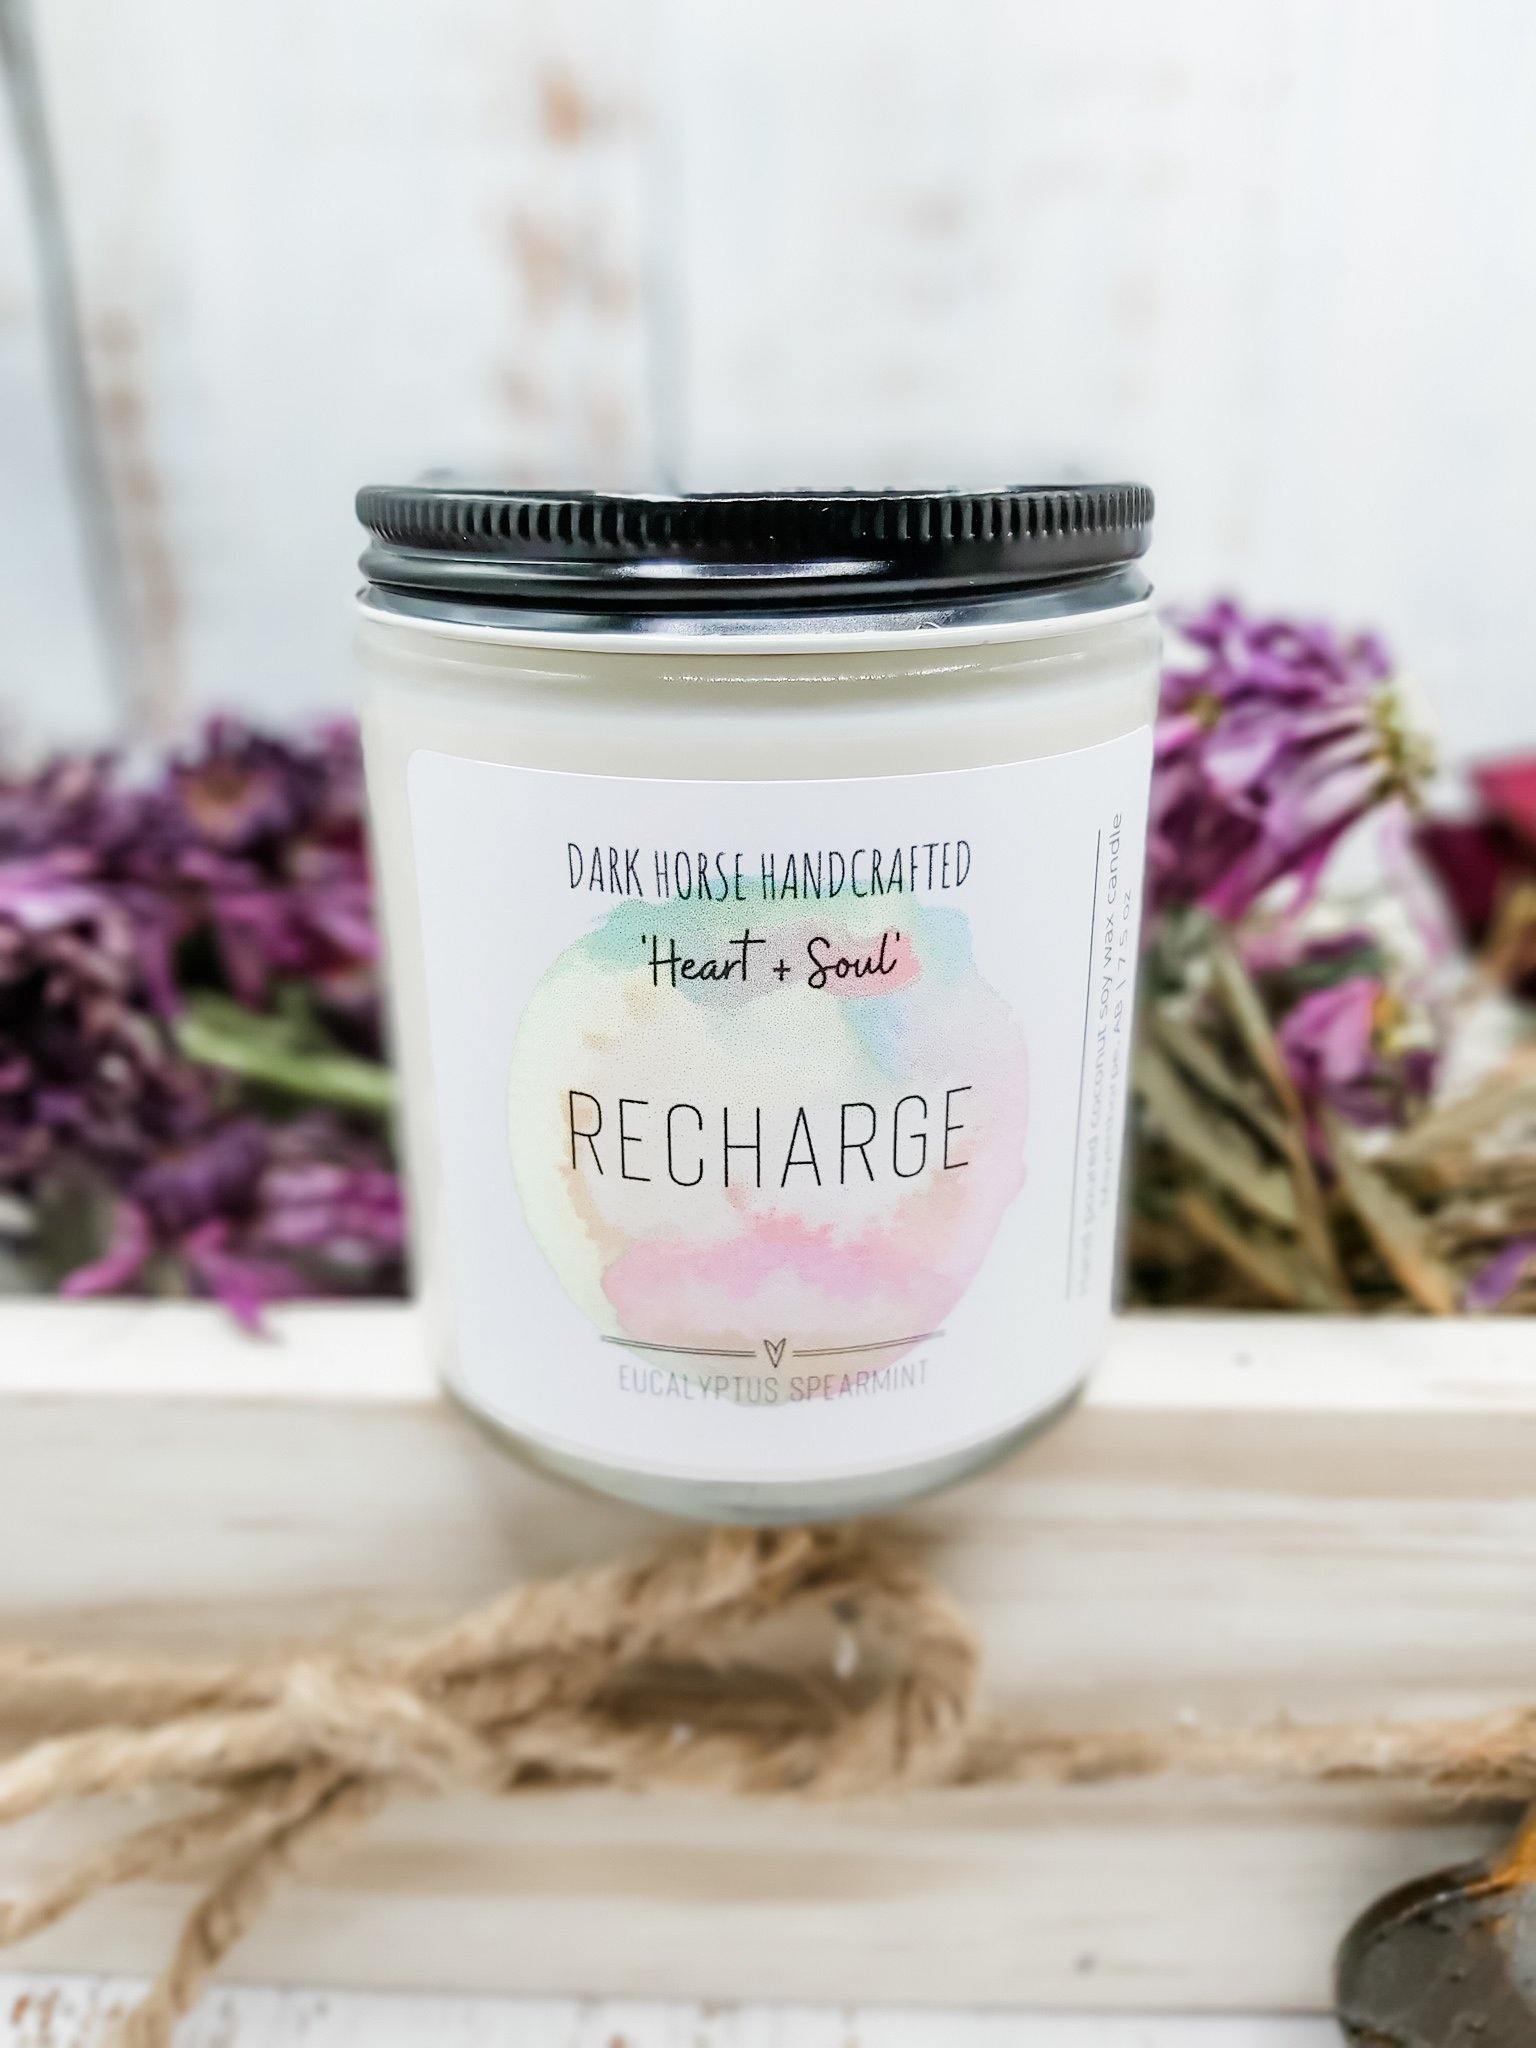 Recharge - Soy Candle 'Heart & Soul' Collection - Dark Horse Handcrafted